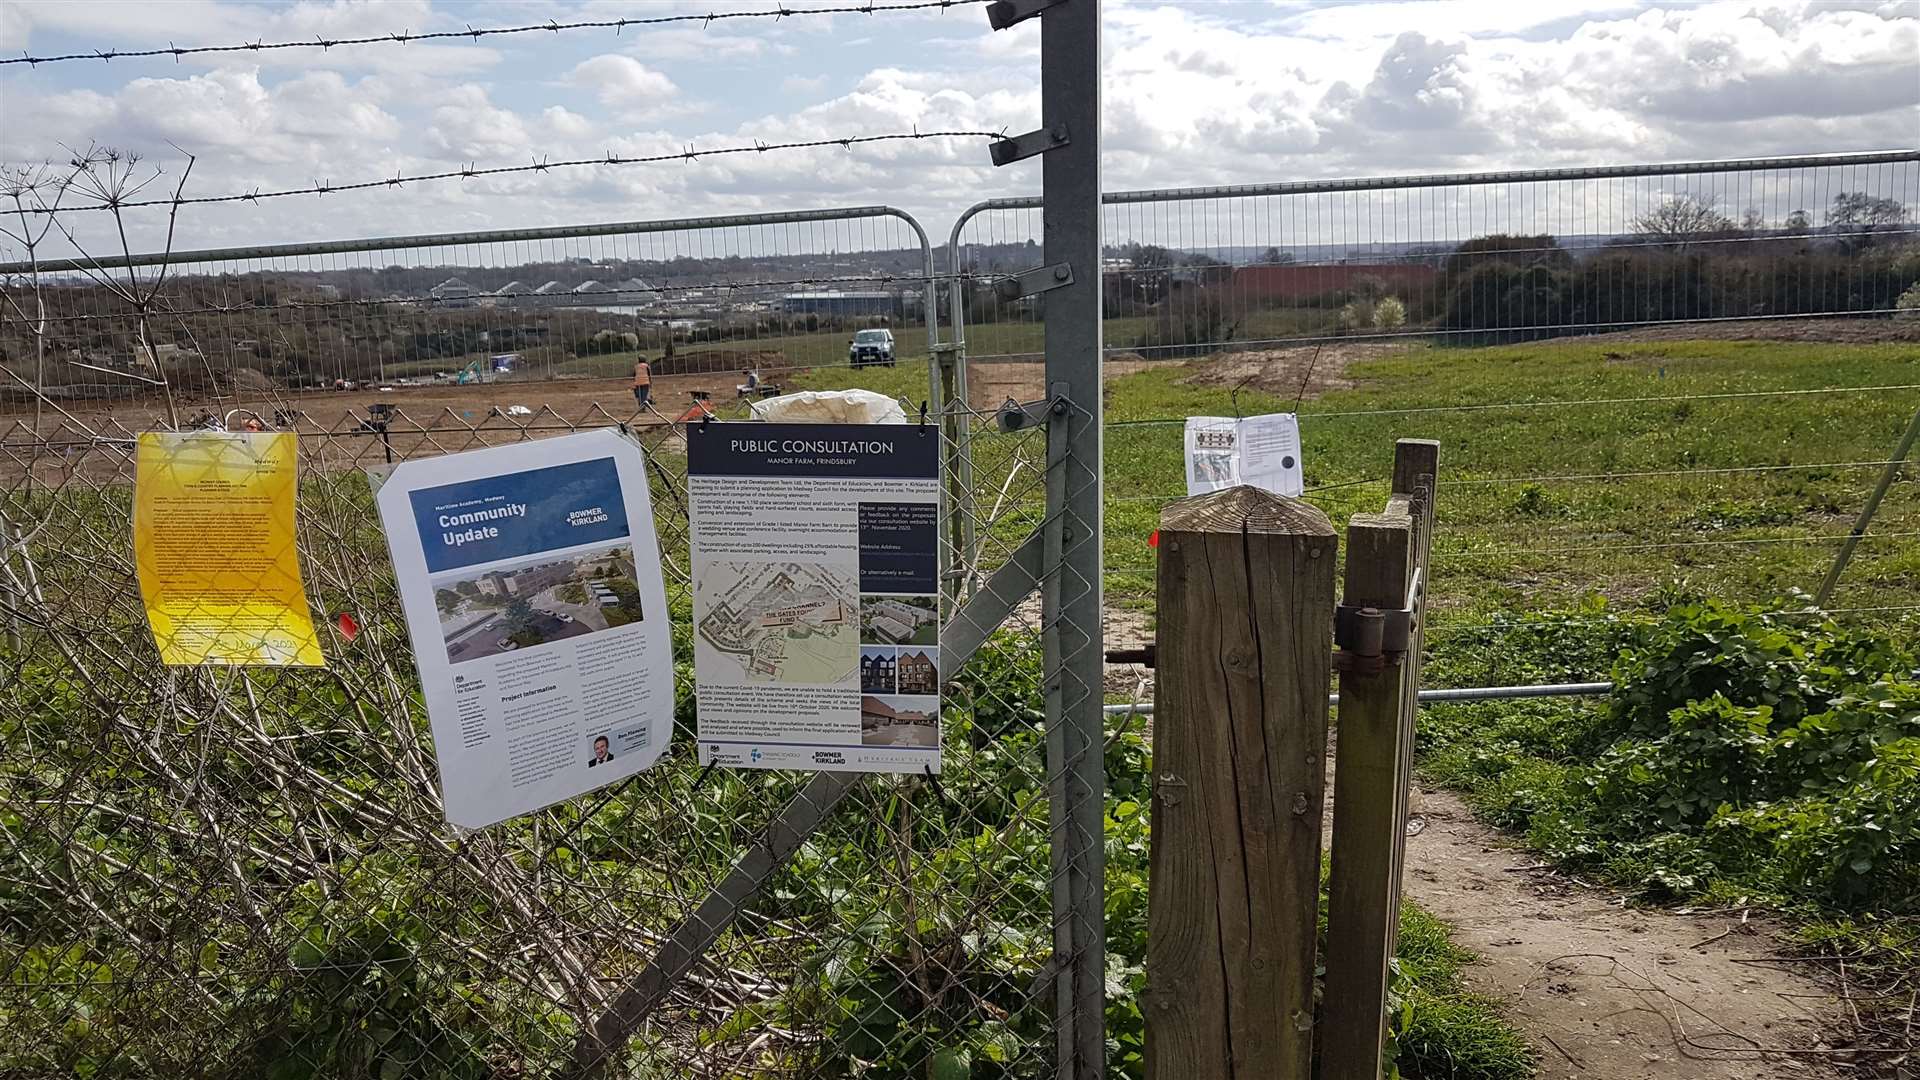 The scene of the proposed Frindsbury homes and school site